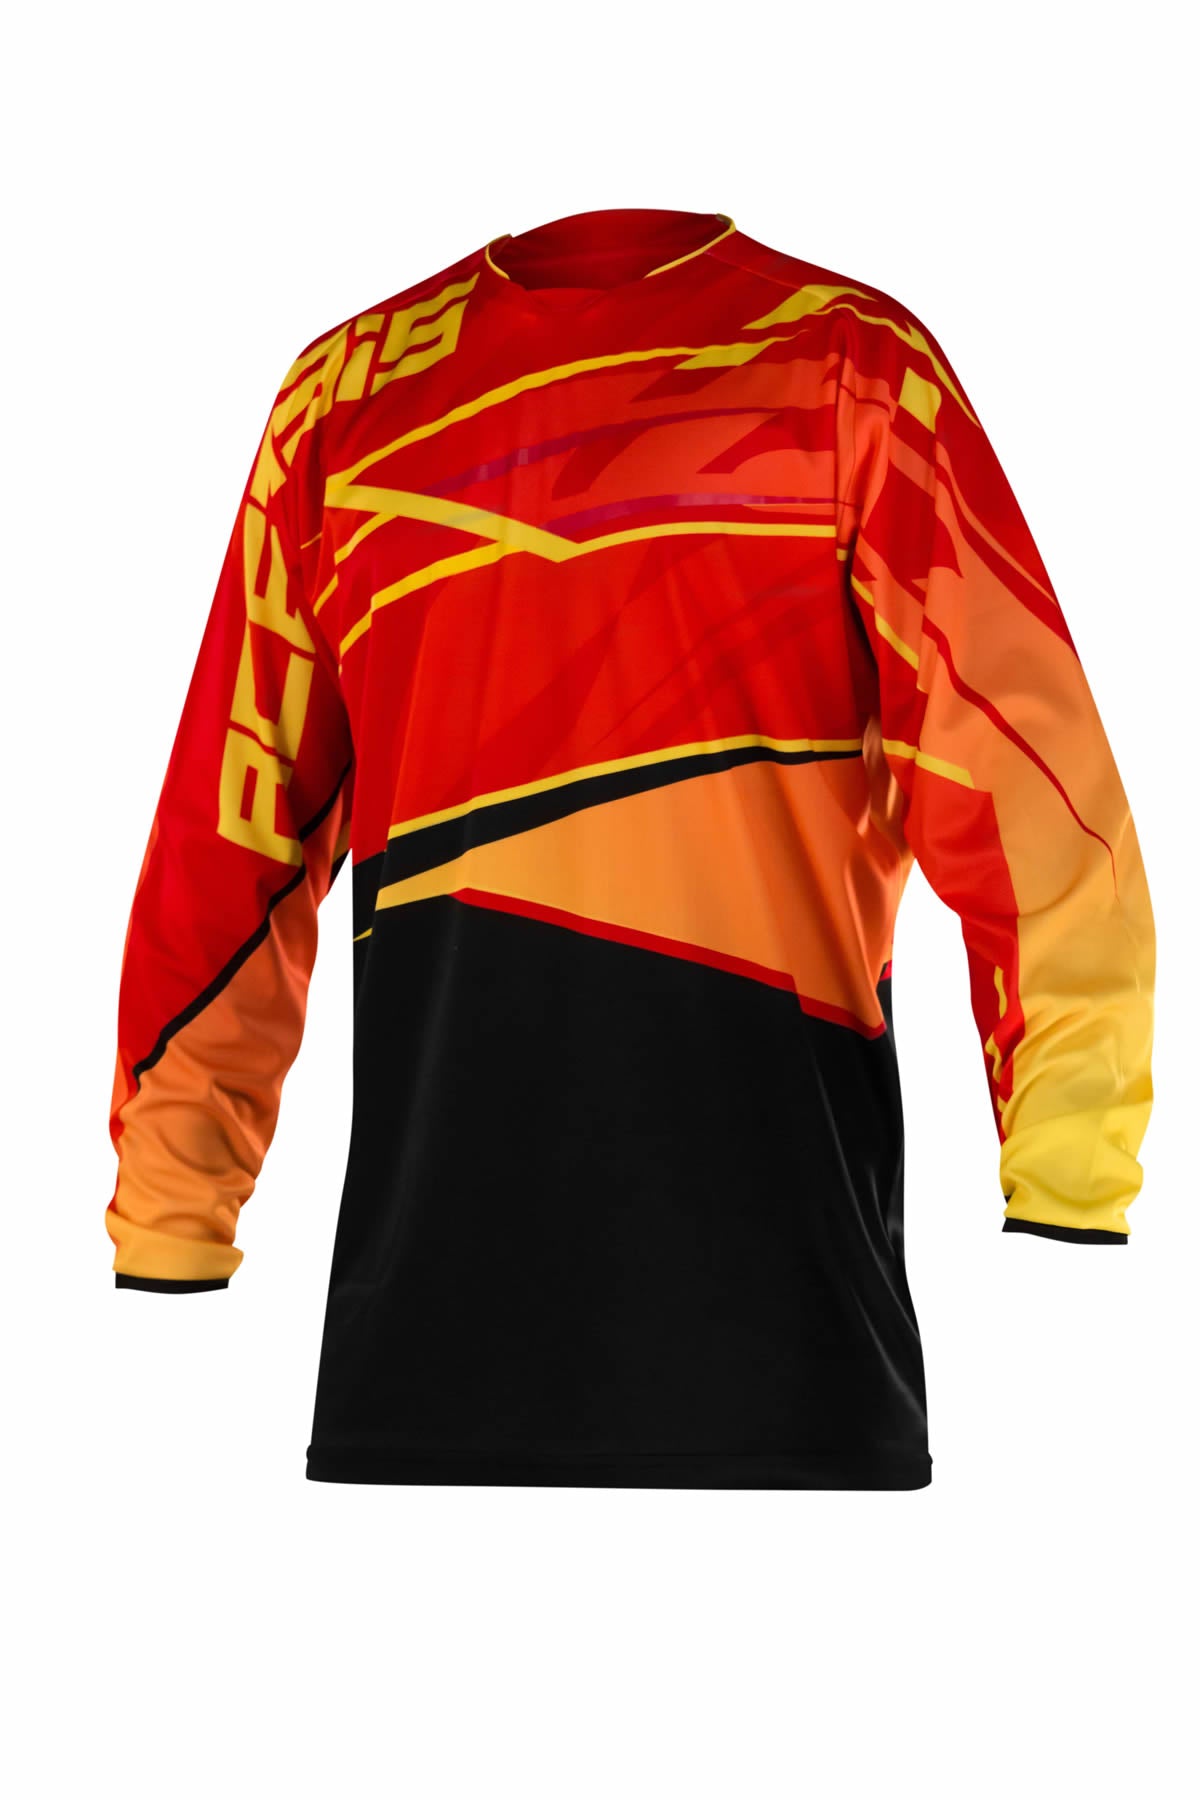 **X-Gear Red/Yellow Jersey